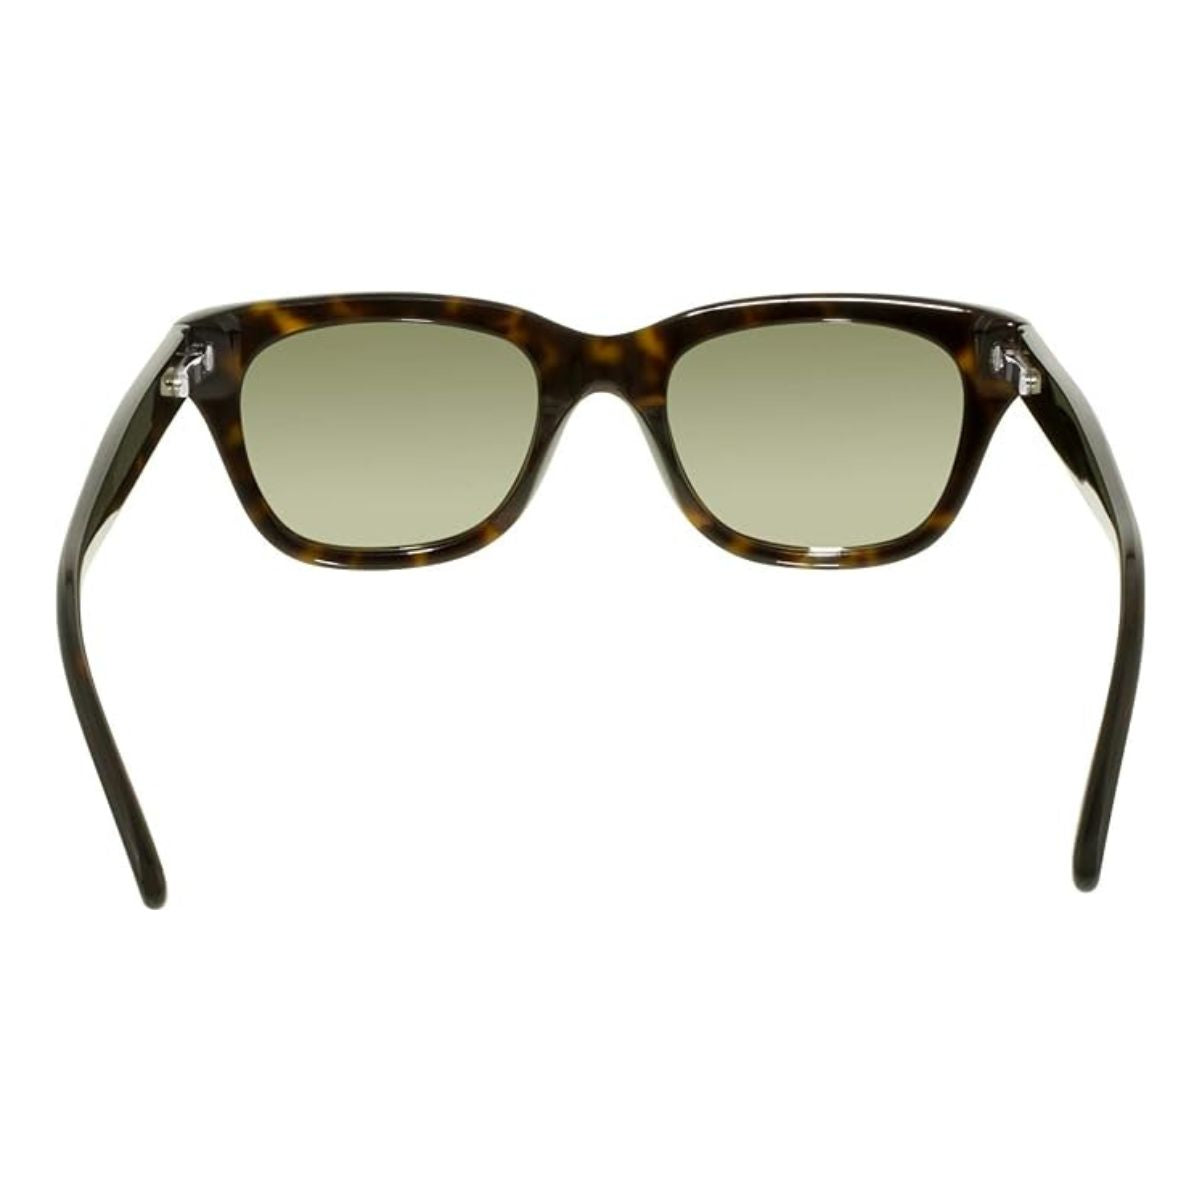 "Shop Latest Cat Eye Tom Ford Sunglasses For Womens At Optorium"